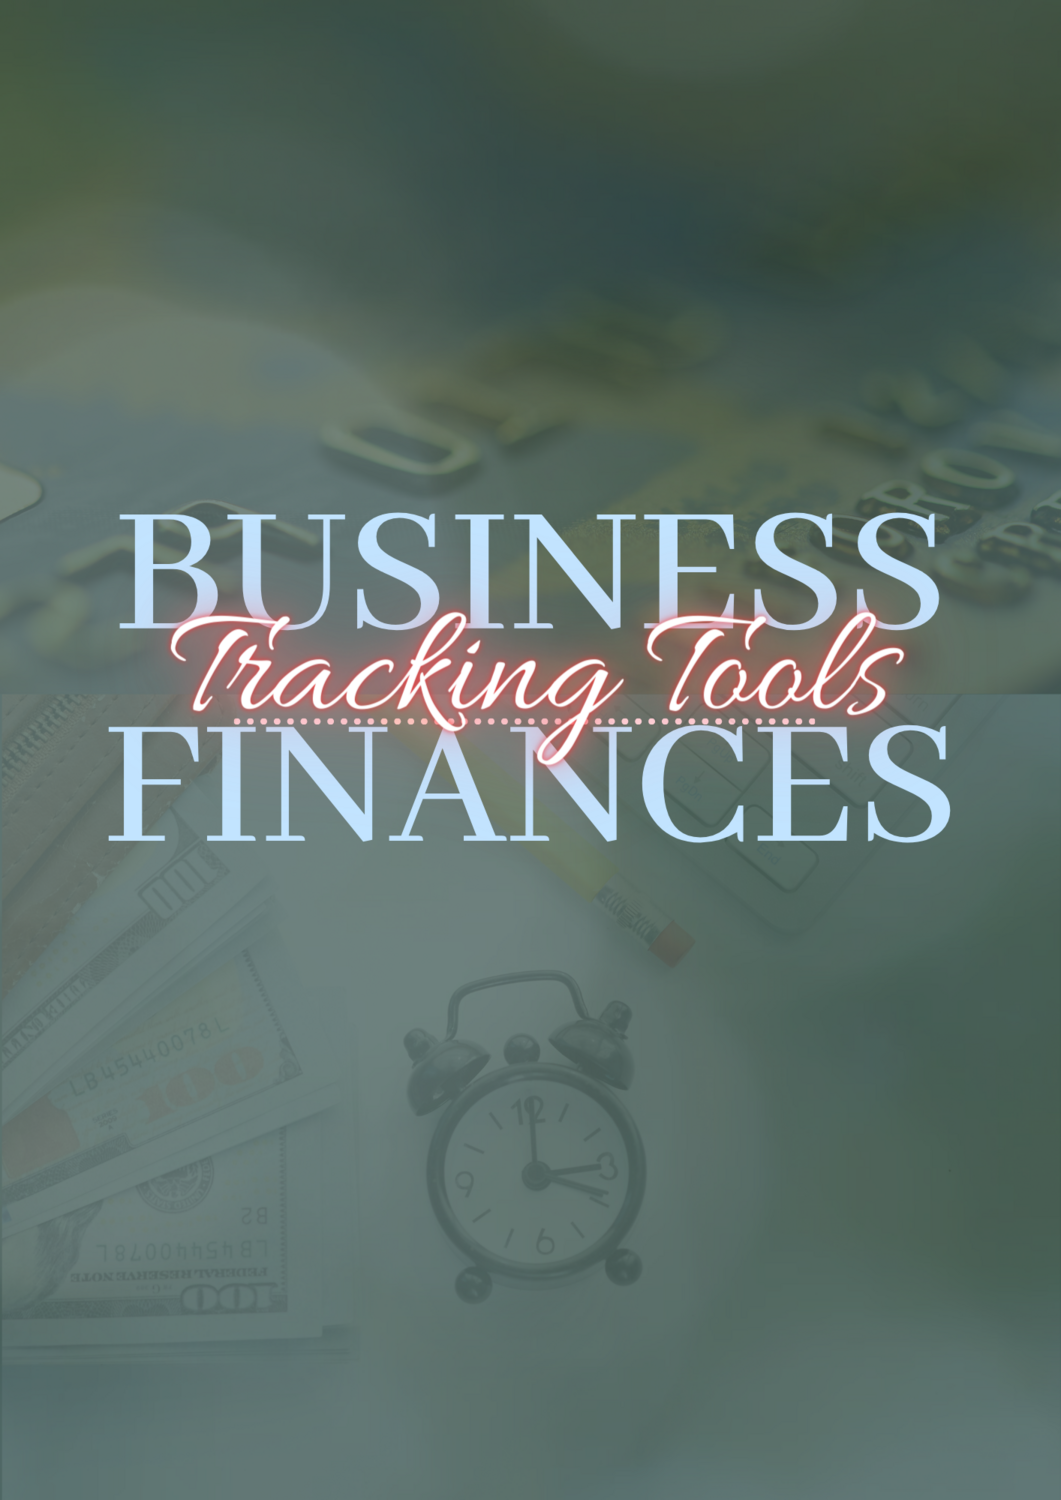 Business Tracking Tools